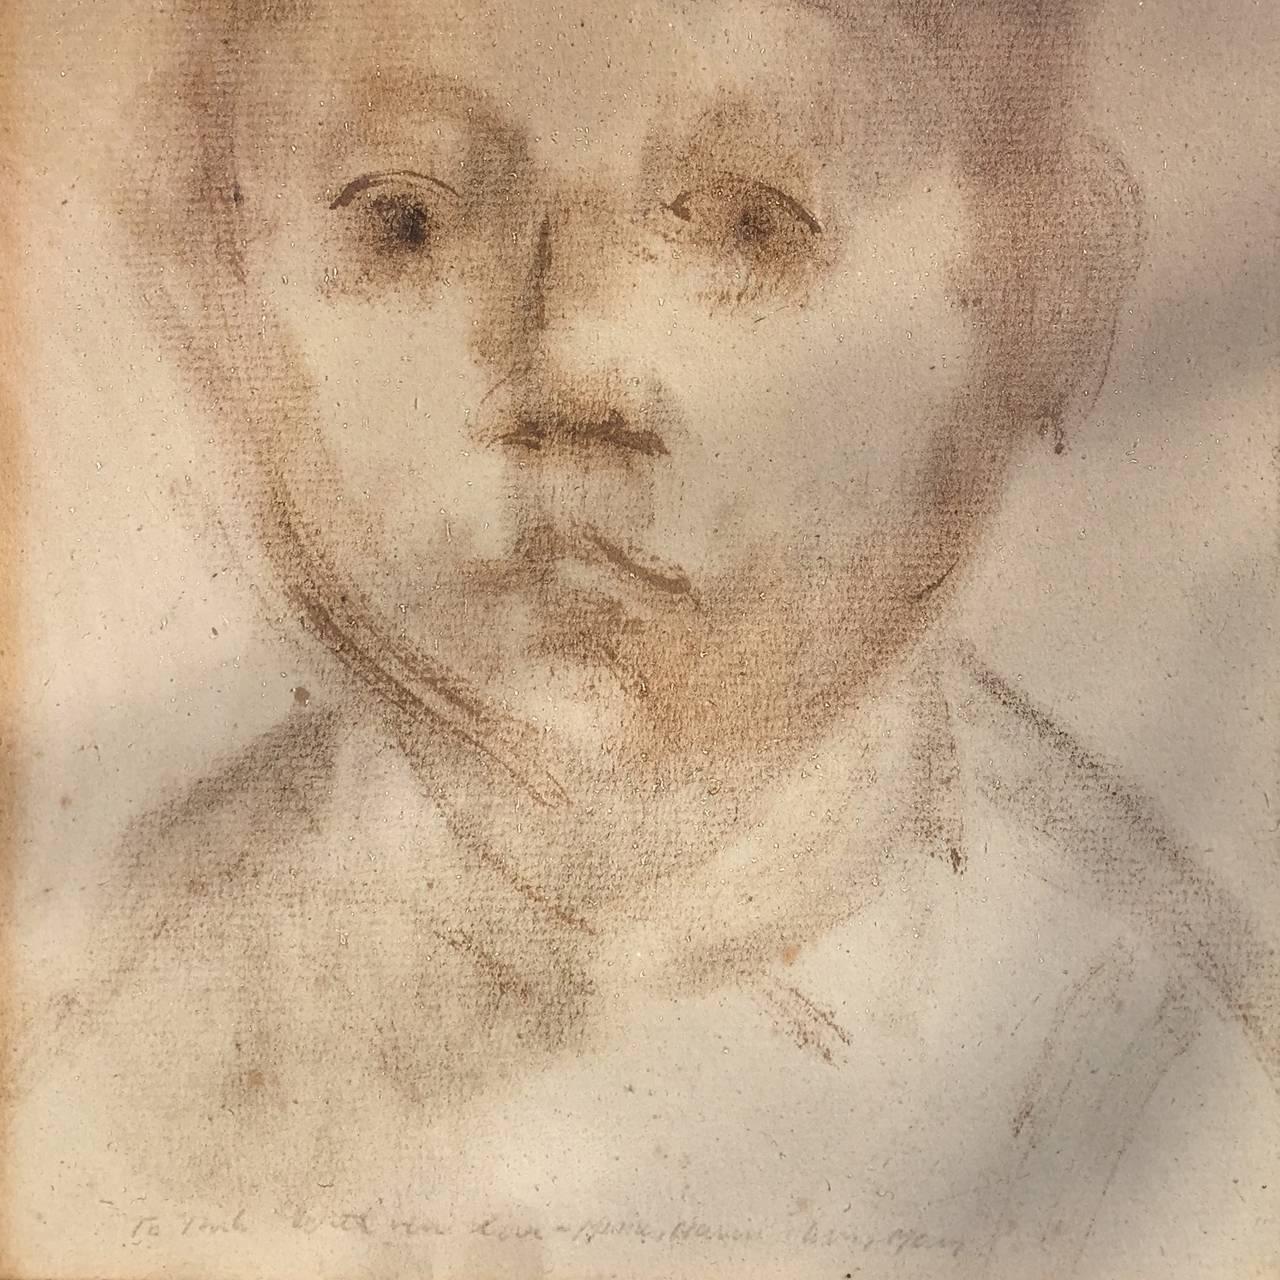 Very well done charcoal and wash portrait of a young boy done circa 1945.  Signed and dedicated lower middle. Condition is good.  Linen gallery mat with thin silver frame. Overall size 16 x 13.5 inches.